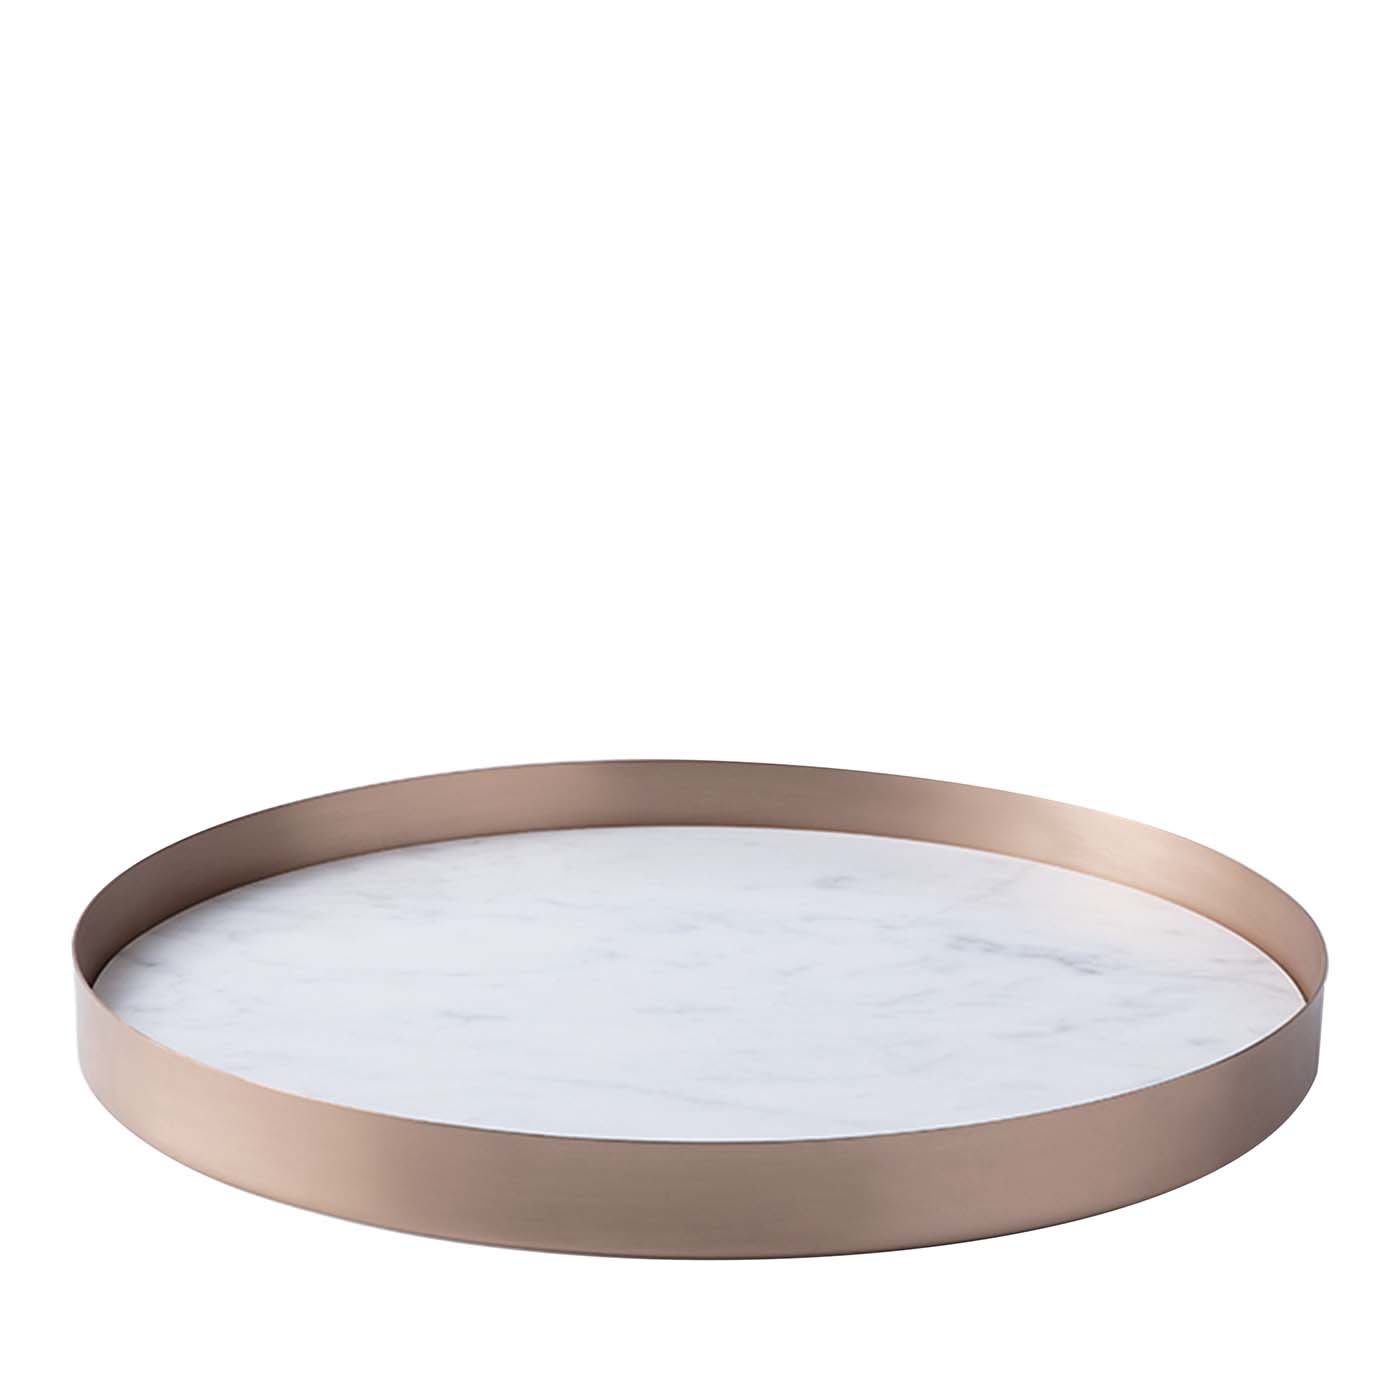 Full Moon Small Tray with Marble Base - Paola C